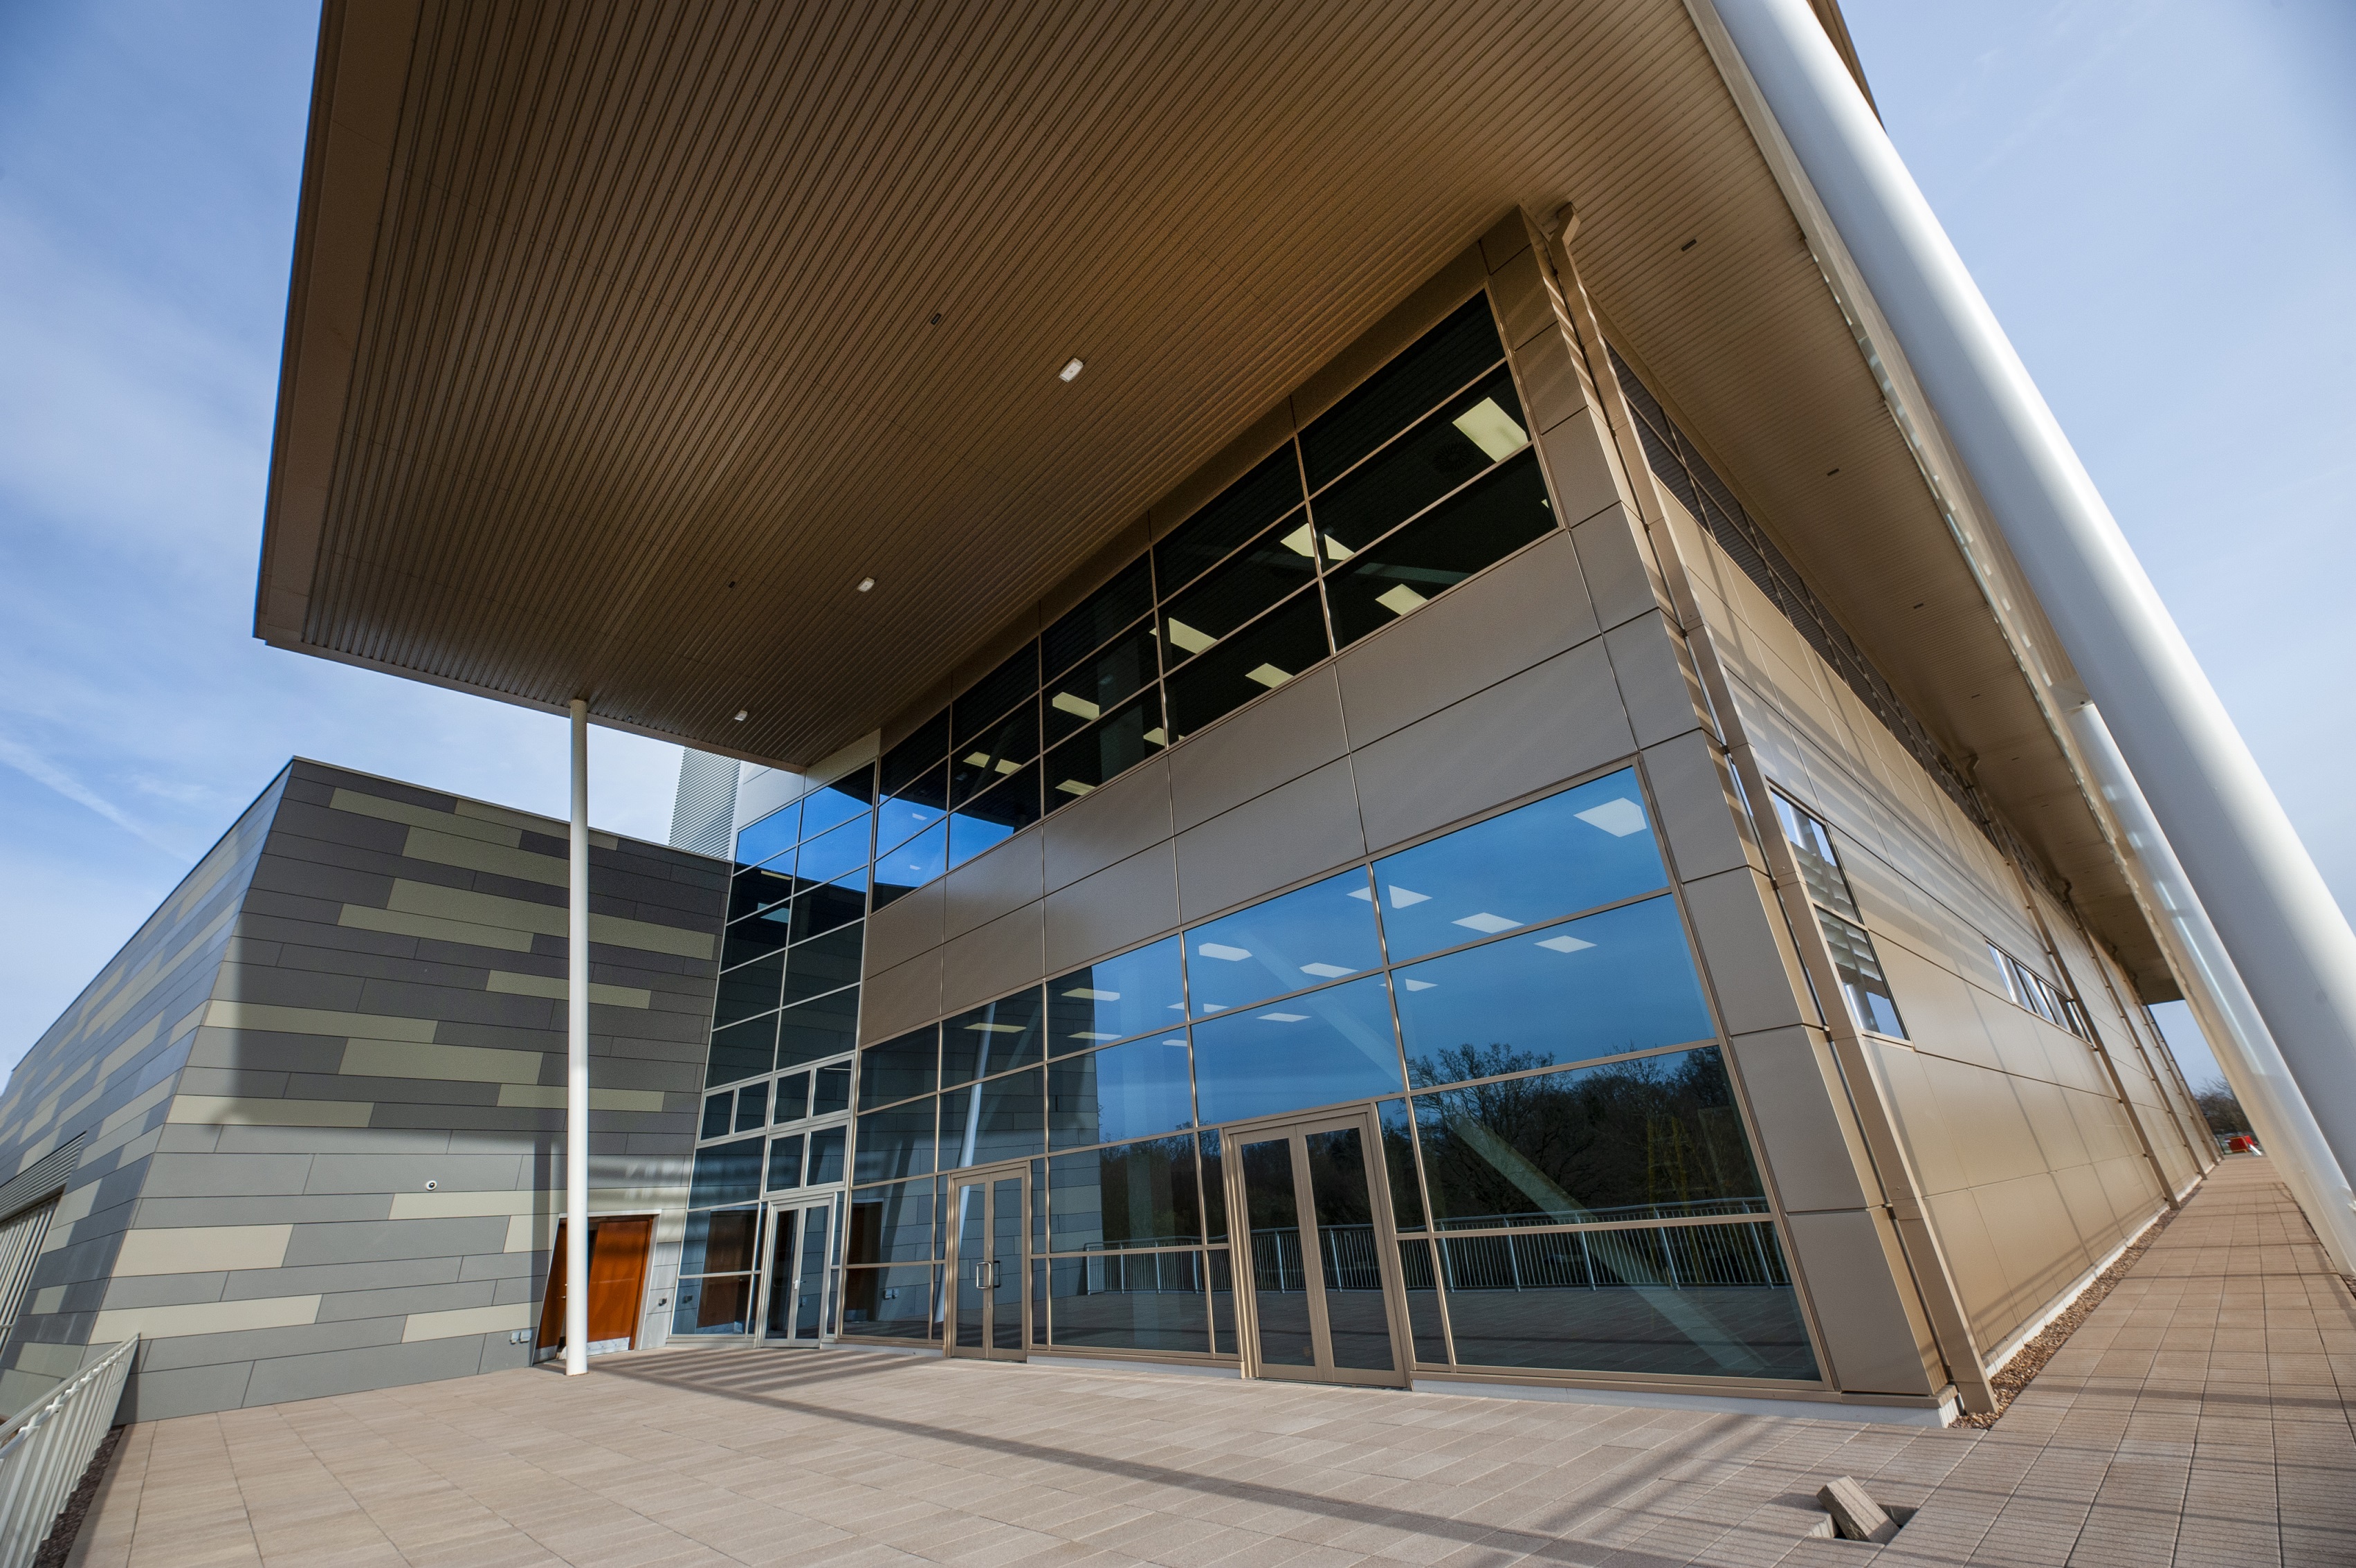 New state-of-the-art sport hub receives national design acclaim